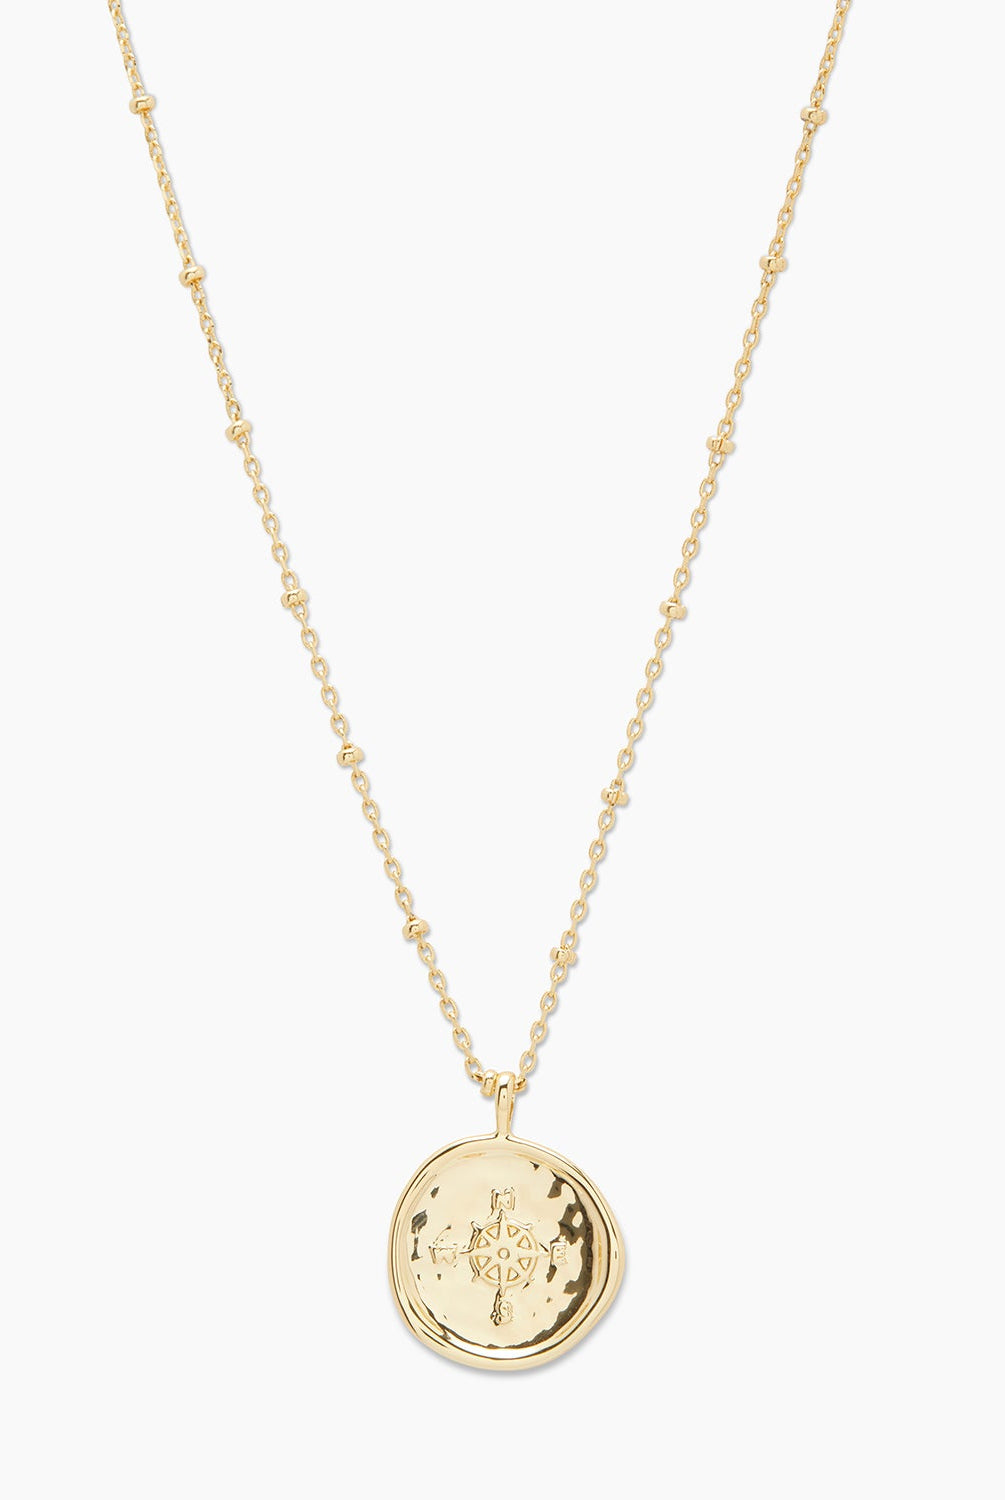 Compass Coin Necklace-Necklaces-Vixen Collection, Day Spa and Women's Boutique Located in Seattle, Washington